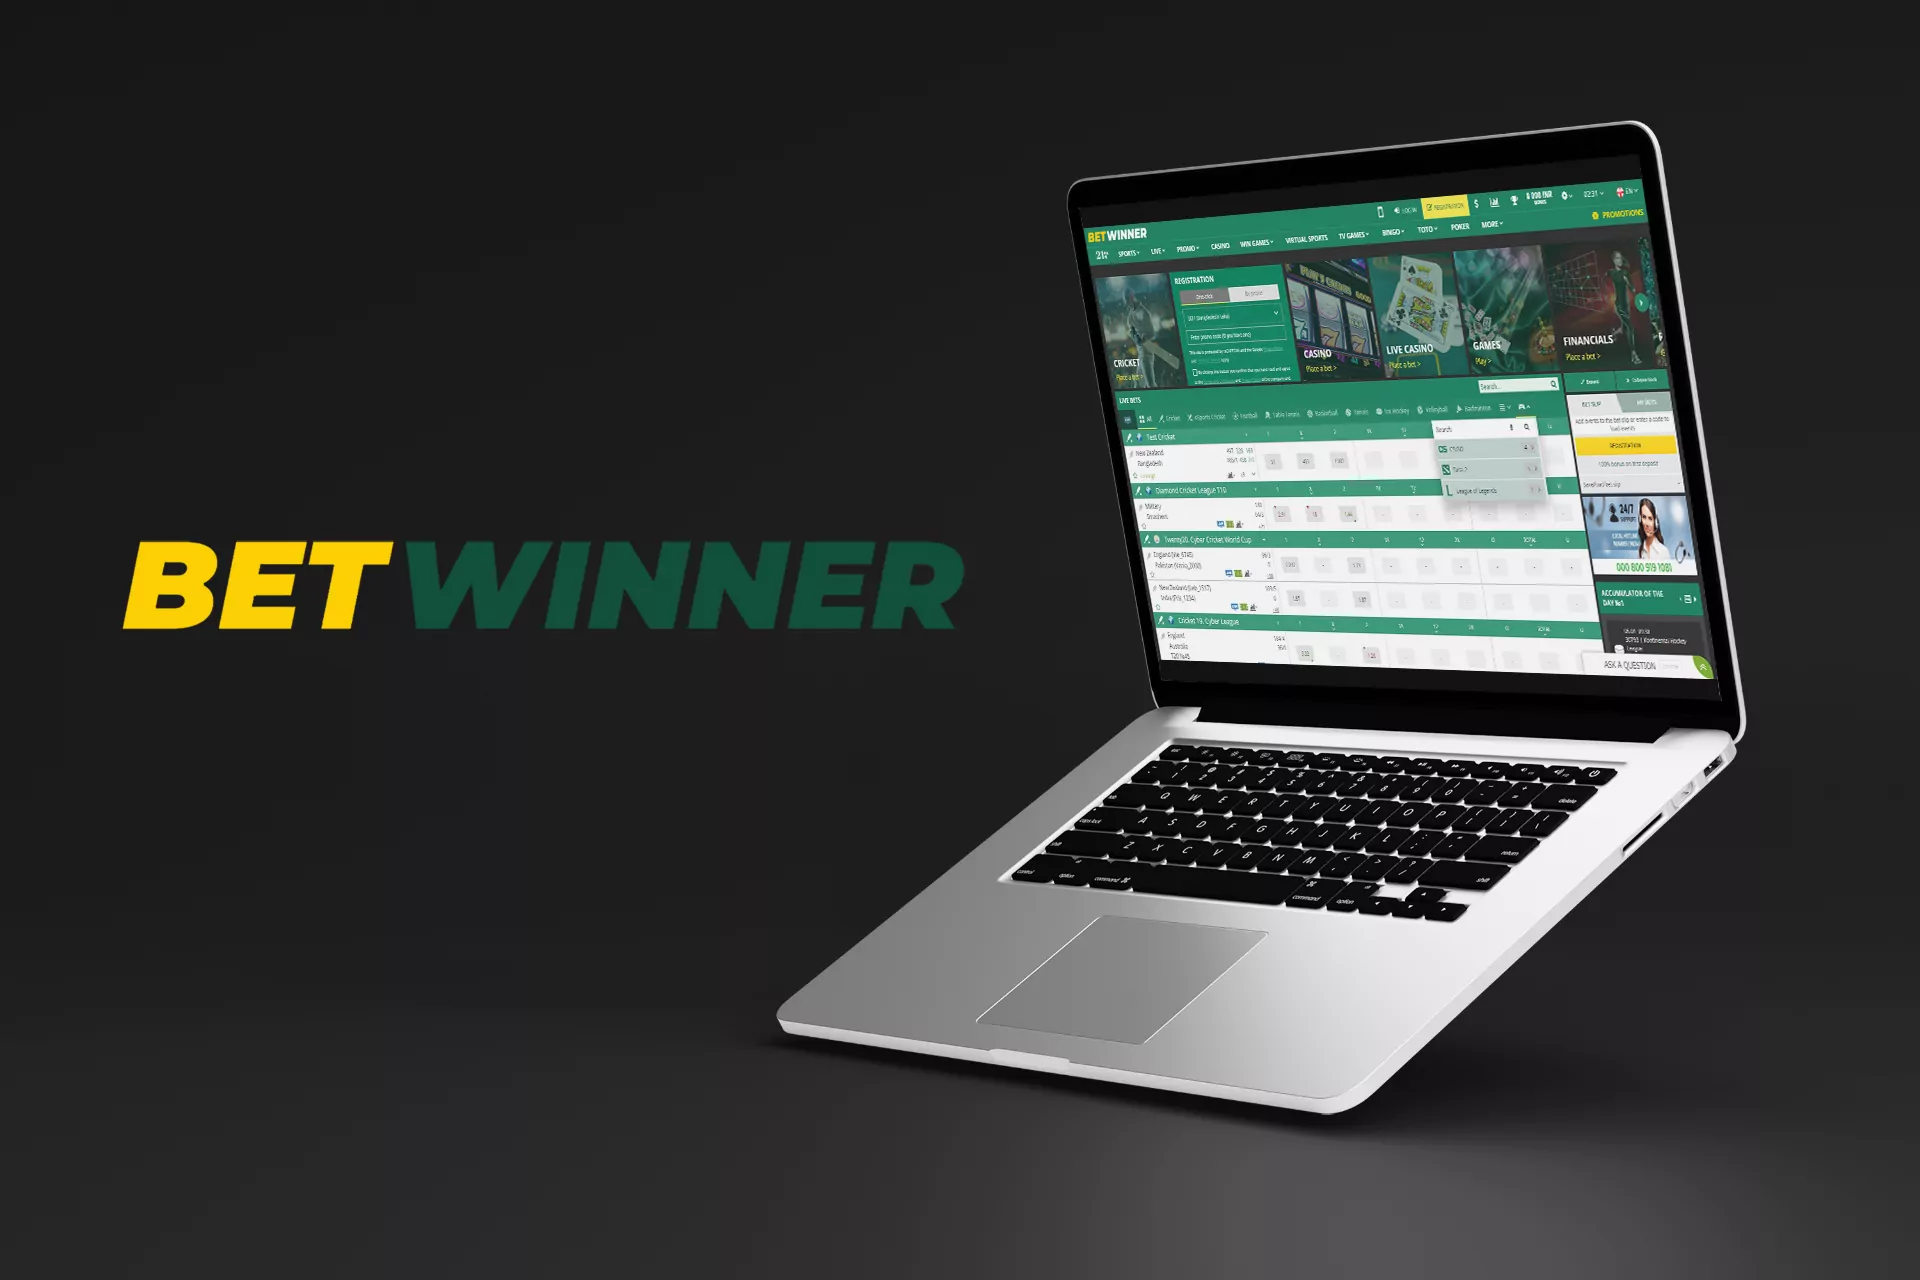 If you like Dota 2 or CS:GO, you must try betting on Betwinner.